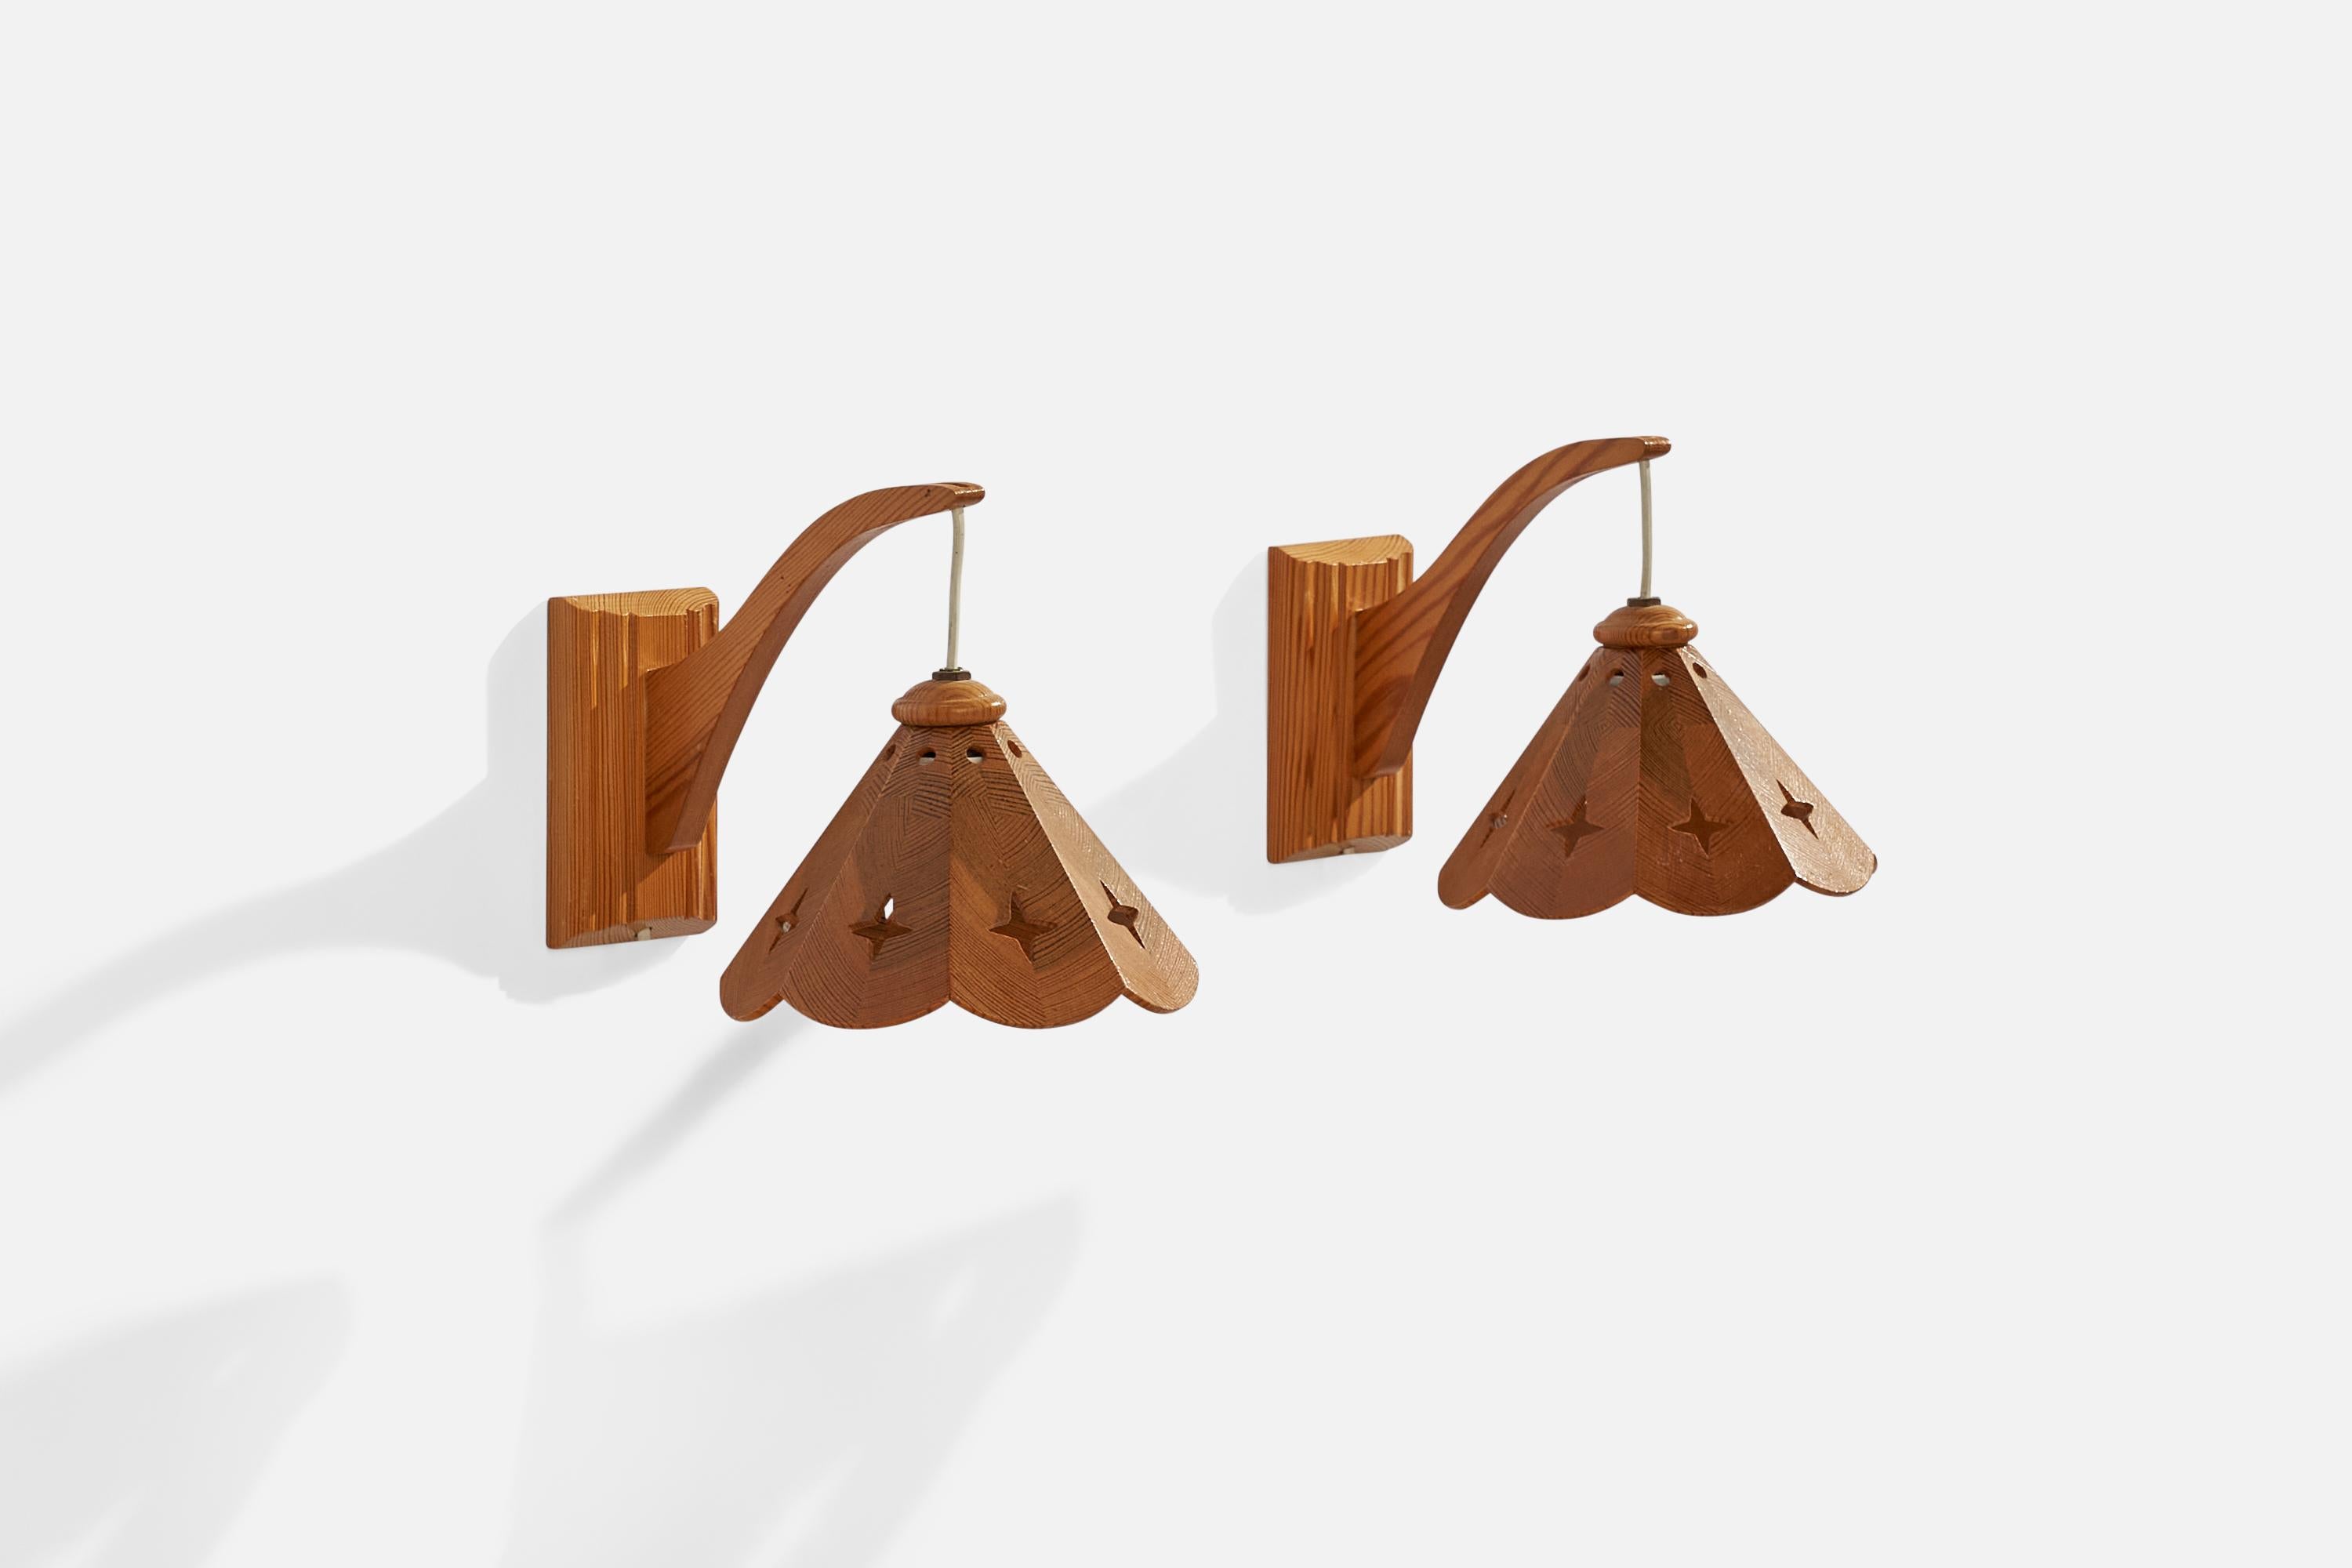  A pair of pine wall lights designed and produced in Sweden, 1970s.

Overall Dimensions (inches): 7.25” H x 6.75” W x 10” D
Back Plate Dimensions (inches): 5.25” H x 3.25” W x .75” D
Bulb Specifications: E-14 Bulb
Number of Sockets: 2
All lighting